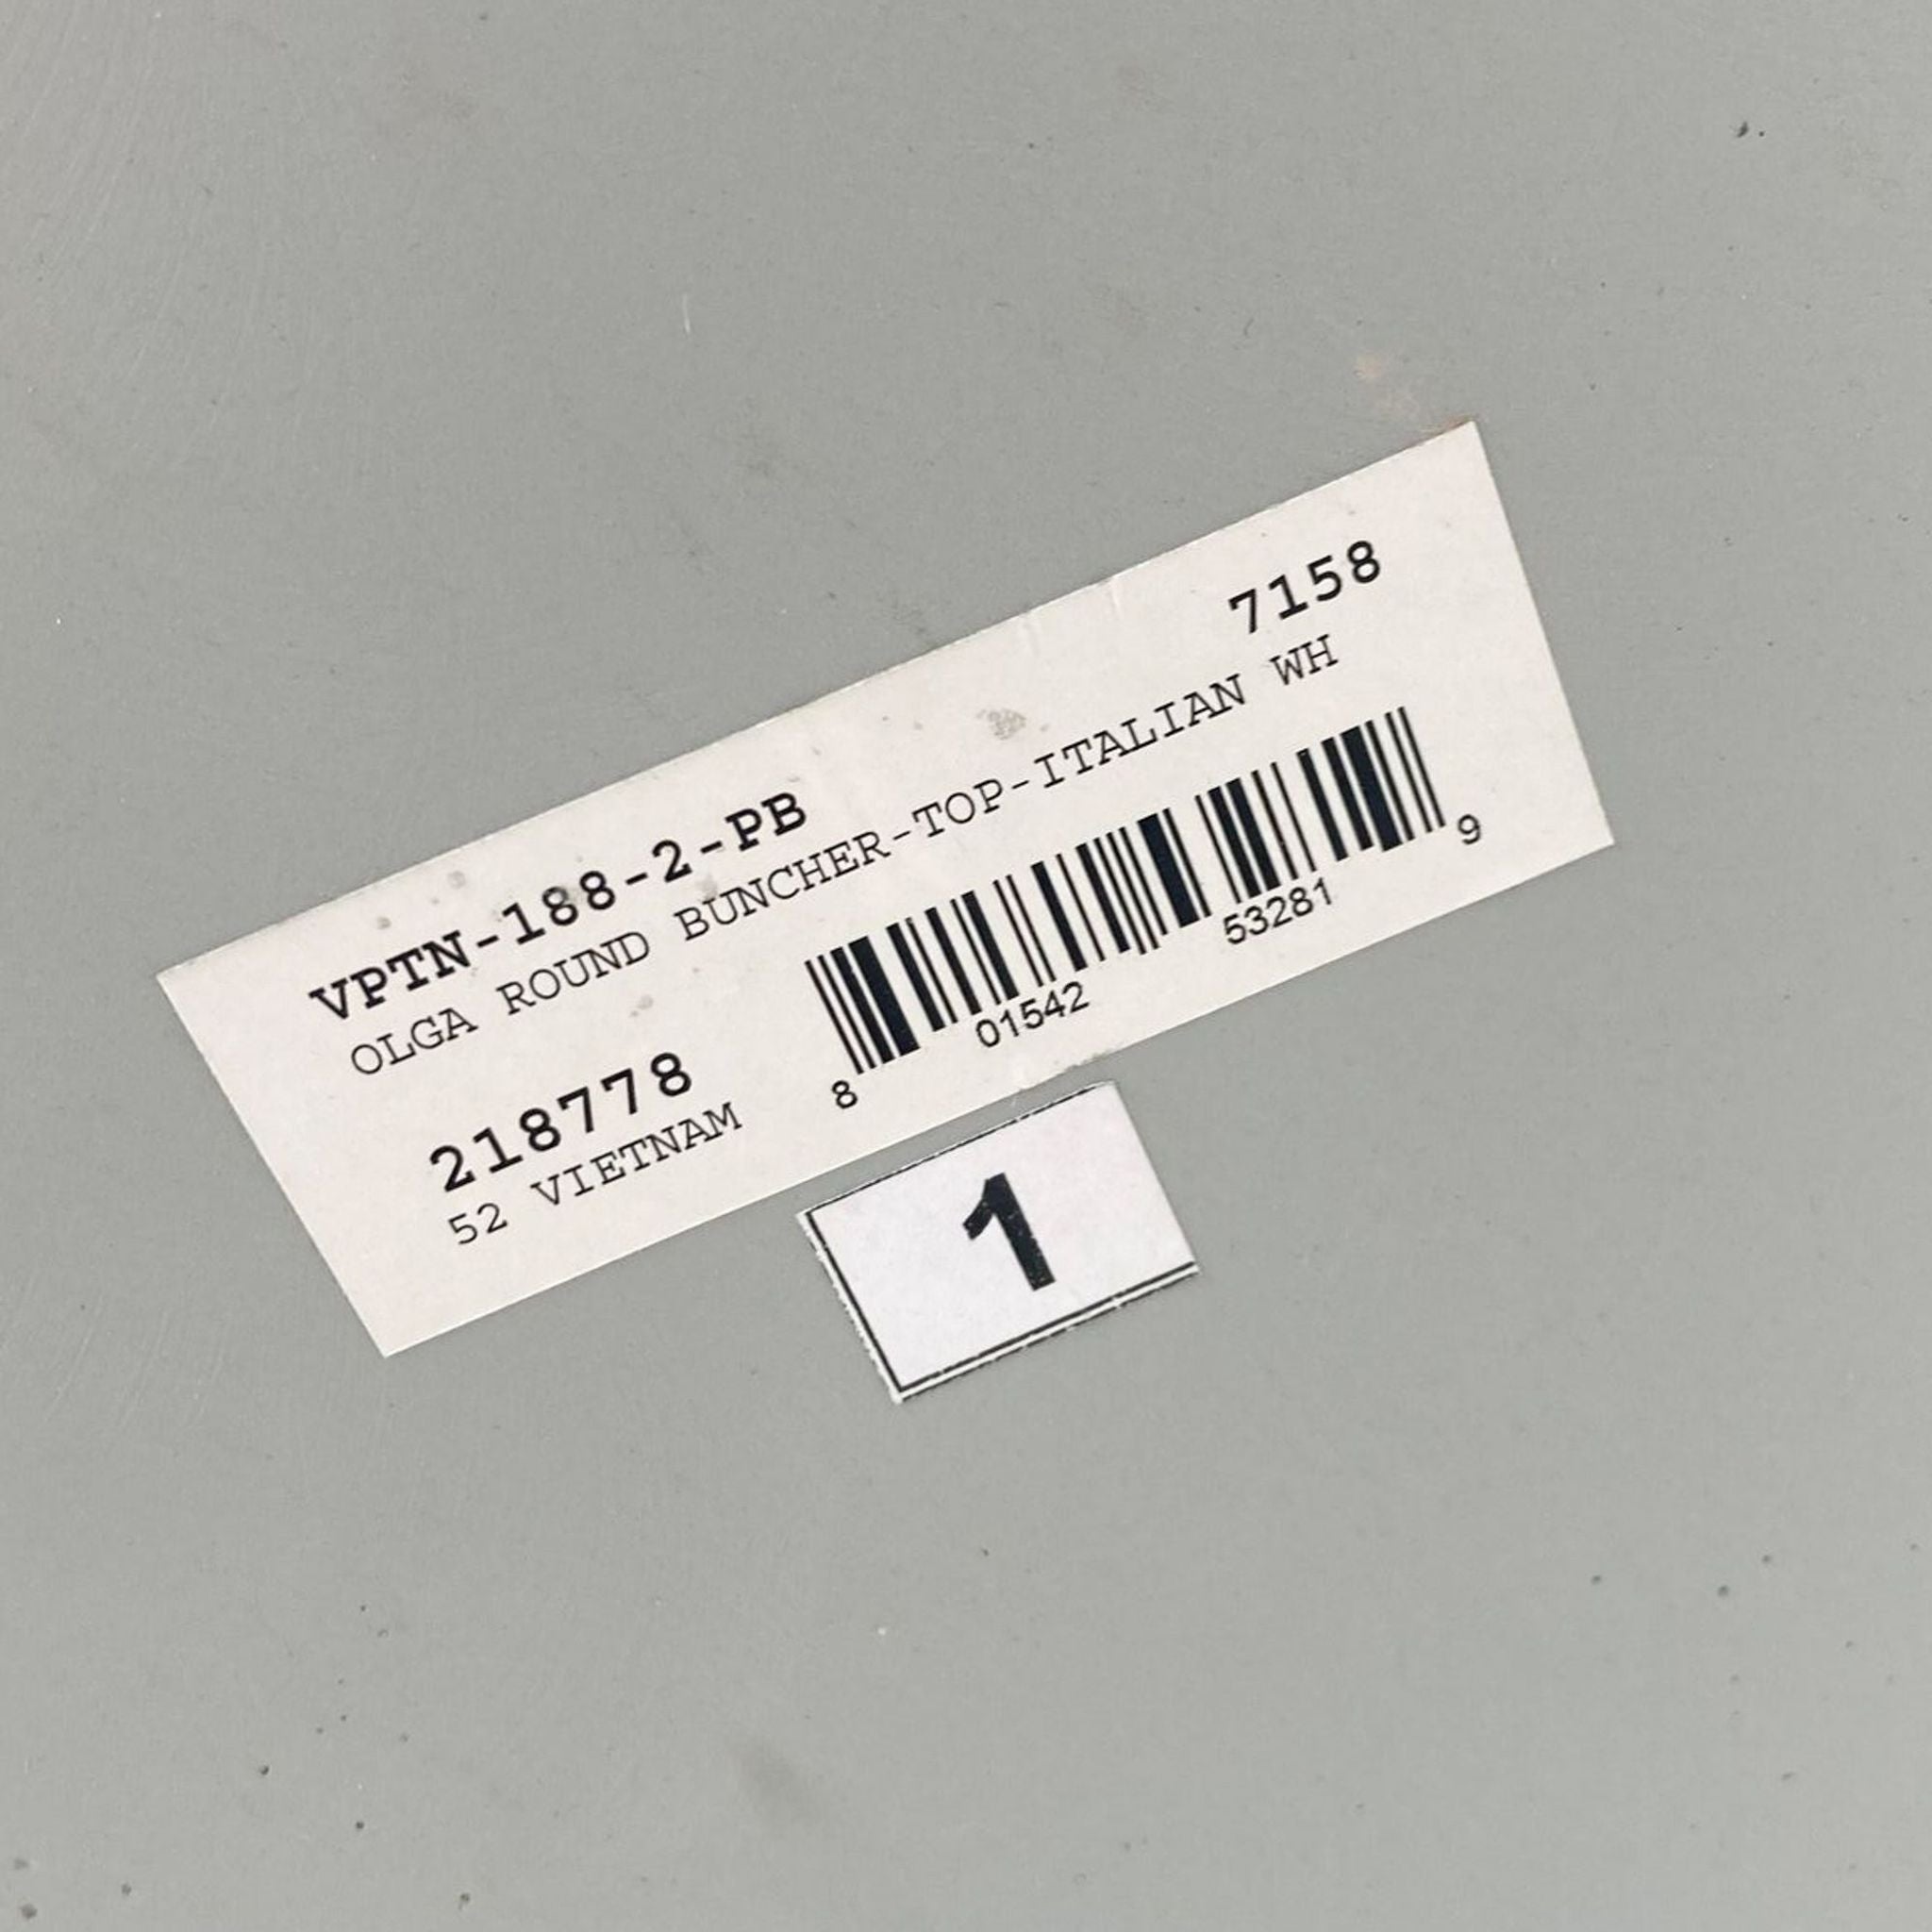 Barcode label on a grey background indicating the marble top component of a Reperch coffee table.